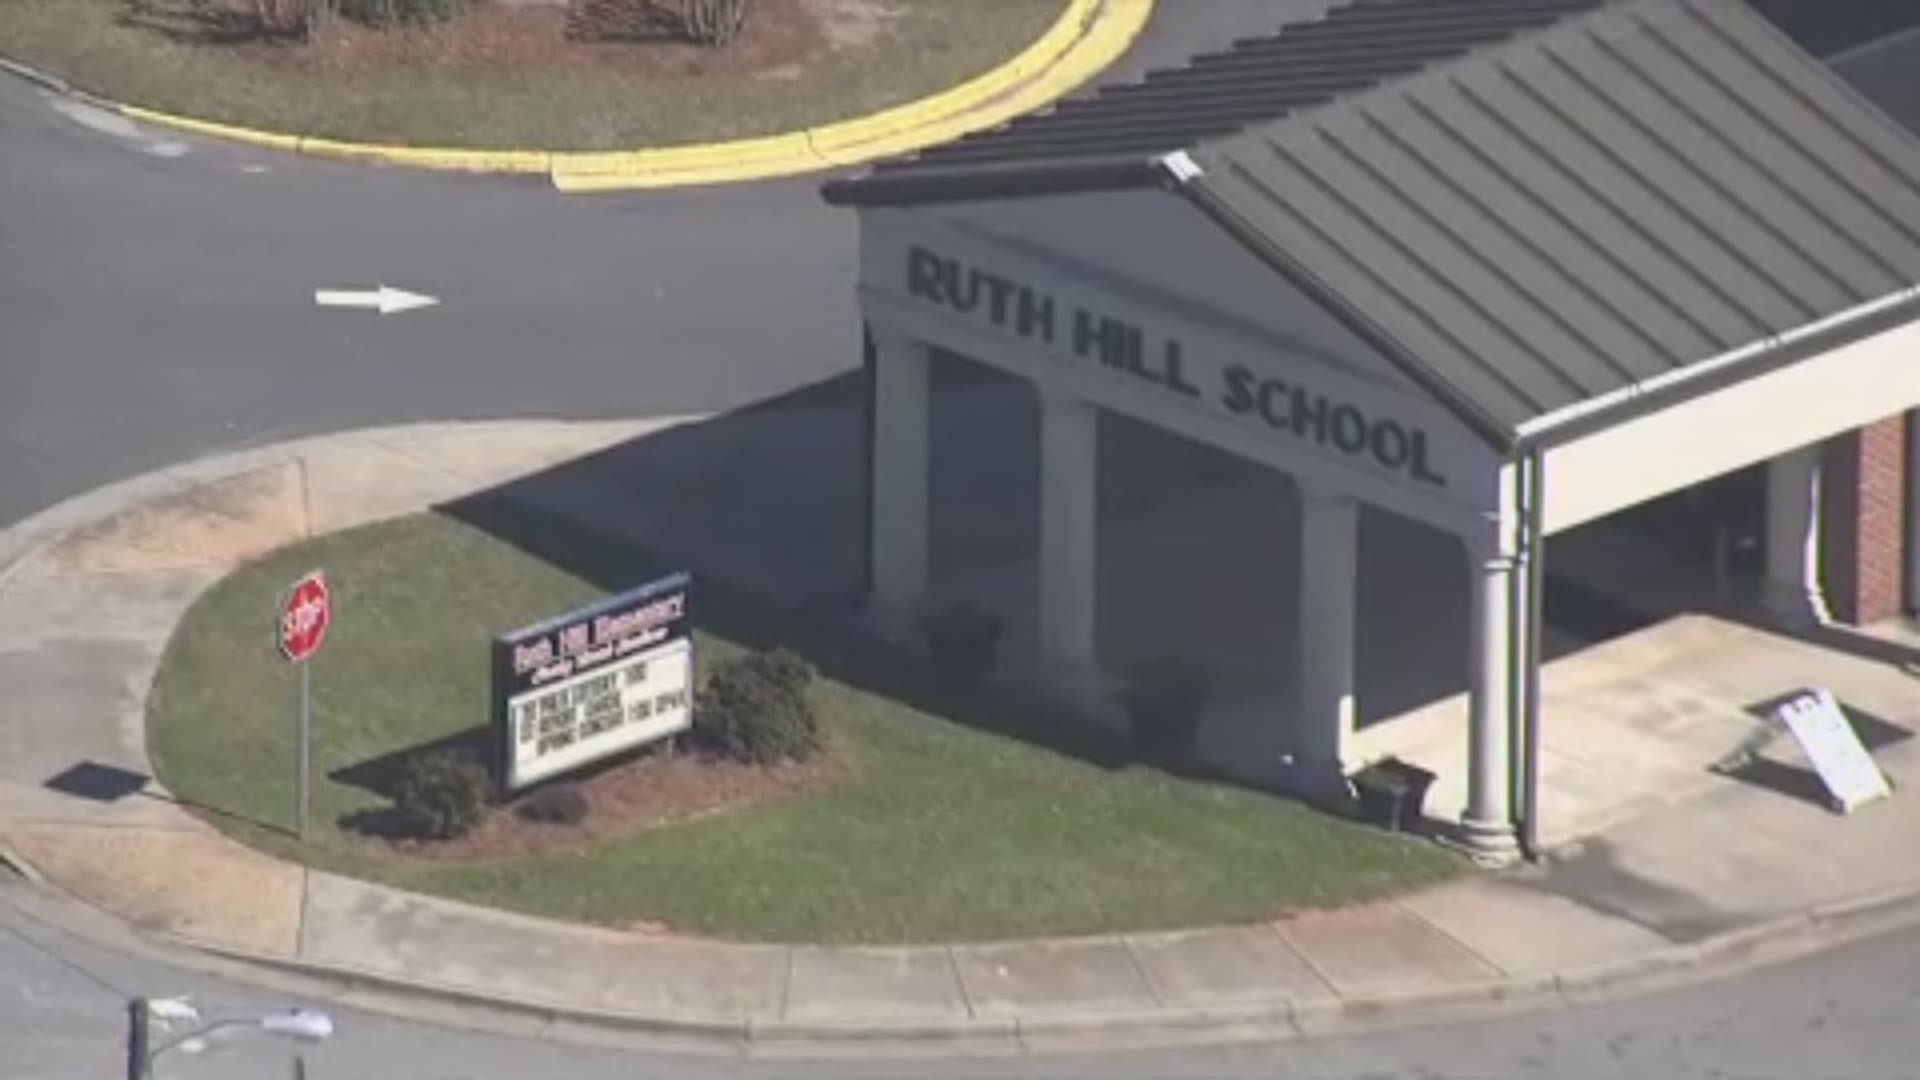 A fourth grade student had a loaded pistol in his book bag, according to police.